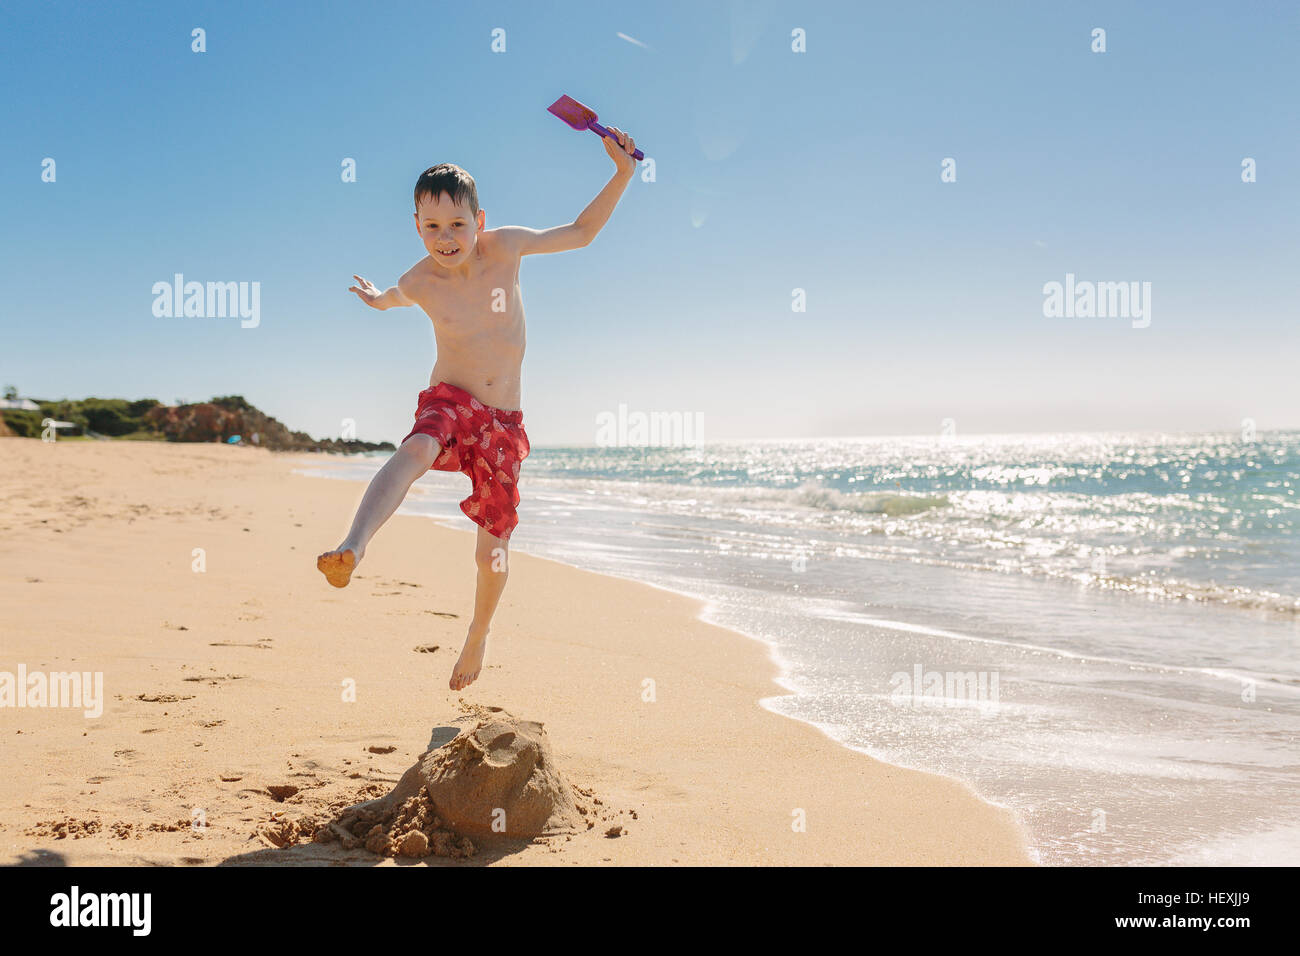 Boy playing and jumping on the beach Stock Photo